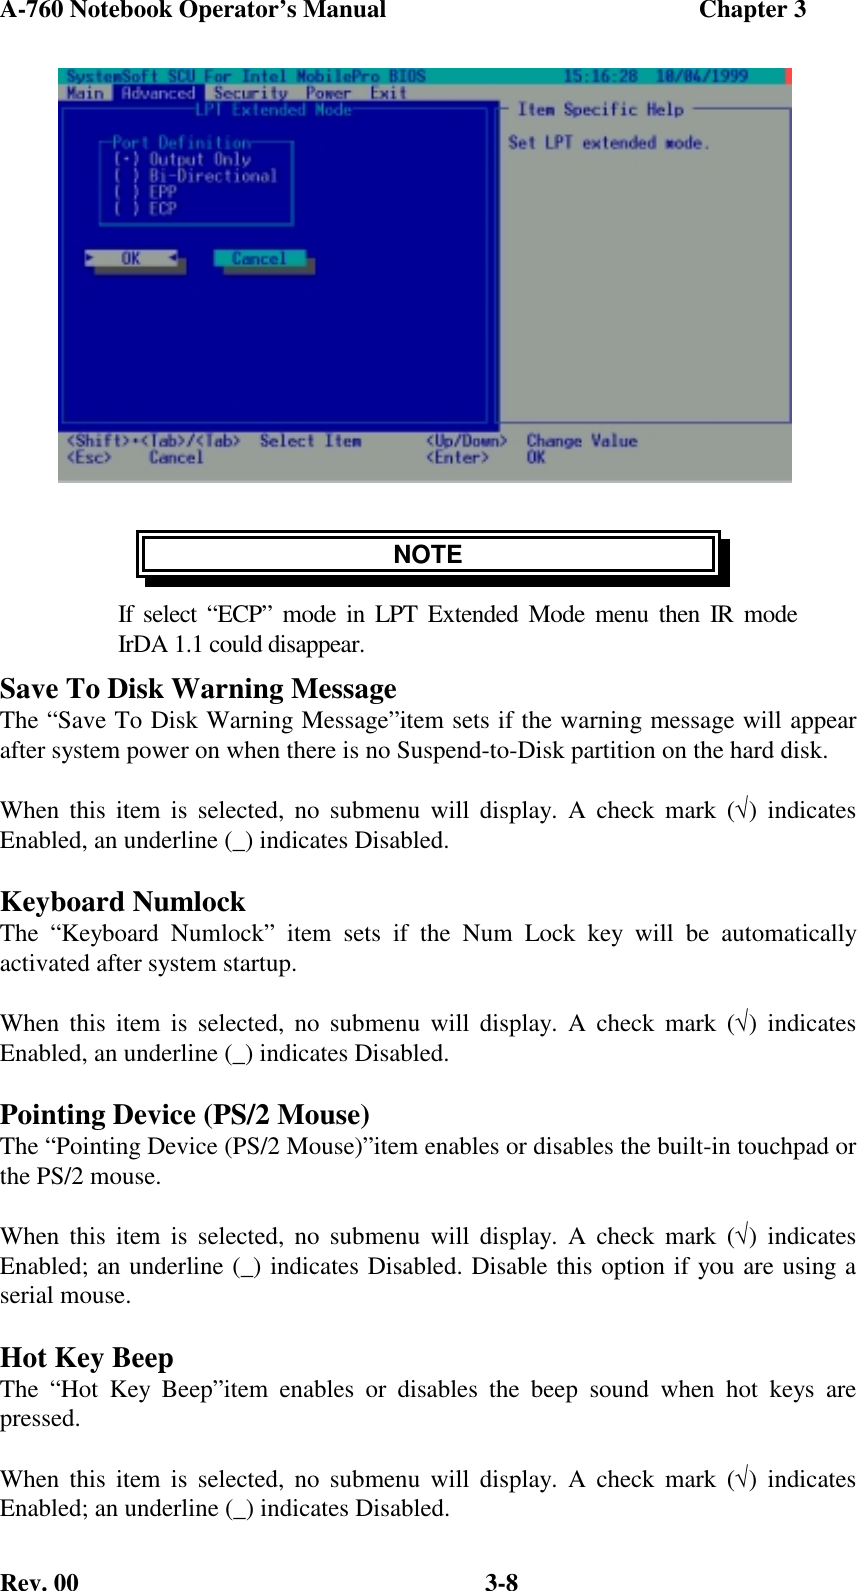 A-760 Notebook Operator’s Manual                                                  Chapter 3Rev. 00 3-8NOTEIf select “ECP” mode in LPT Extended Mode menu then IR modeIrDA 1.1 could disappear.Save To Disk Warning MessageThe “Save To Disk Warning Message”item sets if the warning message will appearafter system power on when there is no Suspend-to-Disk partition on the hard disk.When this item is selected, no submenu will display. A check mark (√) indicatesEnabled, an underline (_) indicates Disabled.Keyboard NumlockThe “Keyboard Numlock” item sets if the Num Lock key will be automaticallyactivated after system startup.When this item is selected, no submenu will display. A check mark (√) indicatesEnabled, an underline (_) indicates Disabled.Pointing Device (PS/2 Mouse)The “Pointing Device (PS/2 Mouse)”item enables or disables the built-in touchpad orthe PS/2 mouse.When this item is selected, no submenu will display. A check mark (√) indicatesEnabled; an underline (_) indicates Disabled. Disable this option if you are using aserial mouse.Hot Key BeepThe “Hot Key Beep”item enables or disables the beep sound when hot keys arepressed.When this item is selected, no submenu will display. A check mark (√) indicatesEnabled; an underline (_) indicates Disabled.